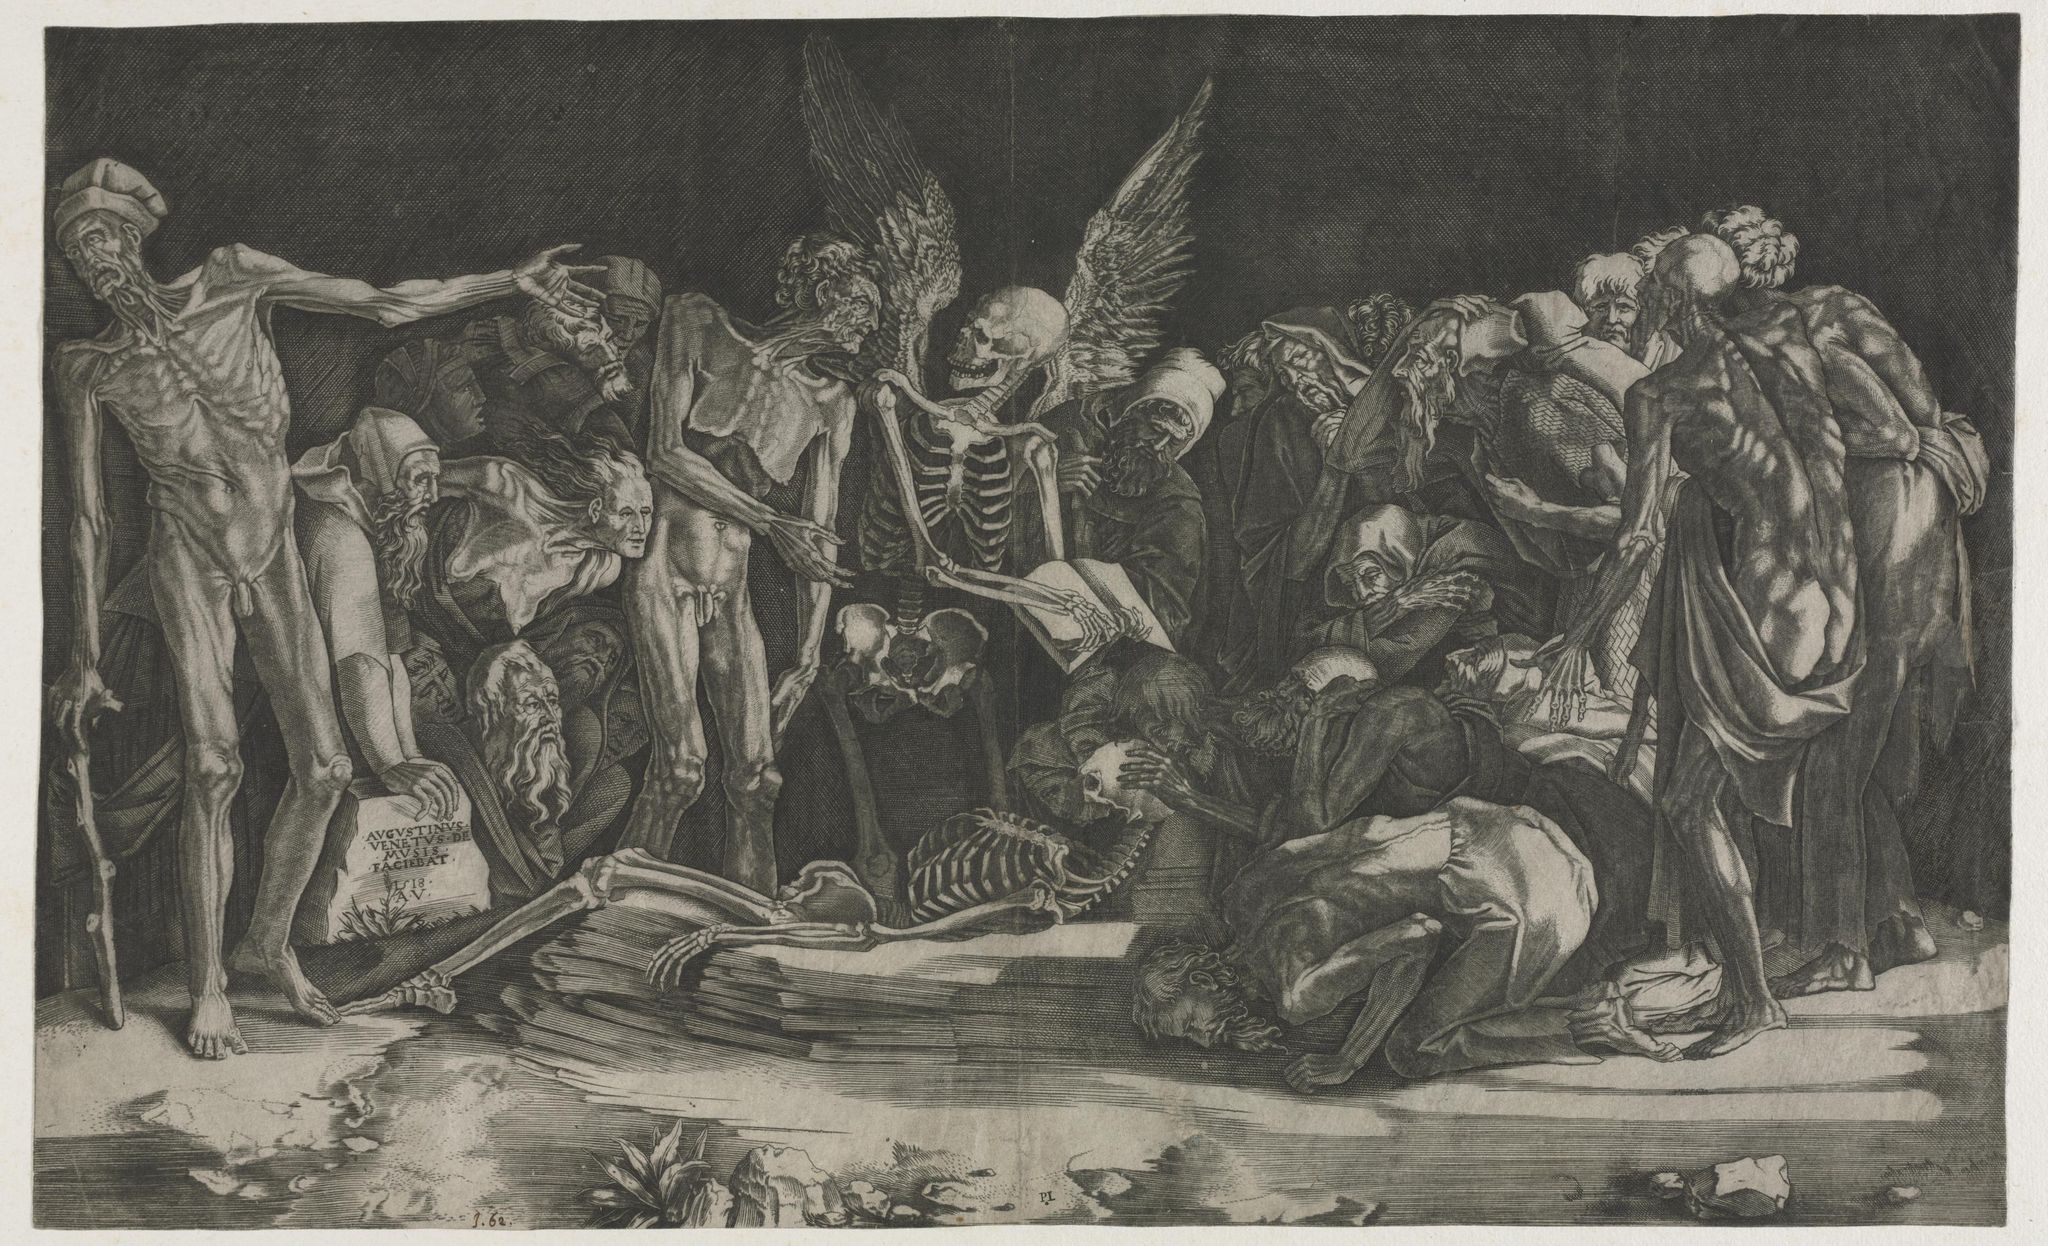 Skeletons, also known as Allegory of Death and Fame